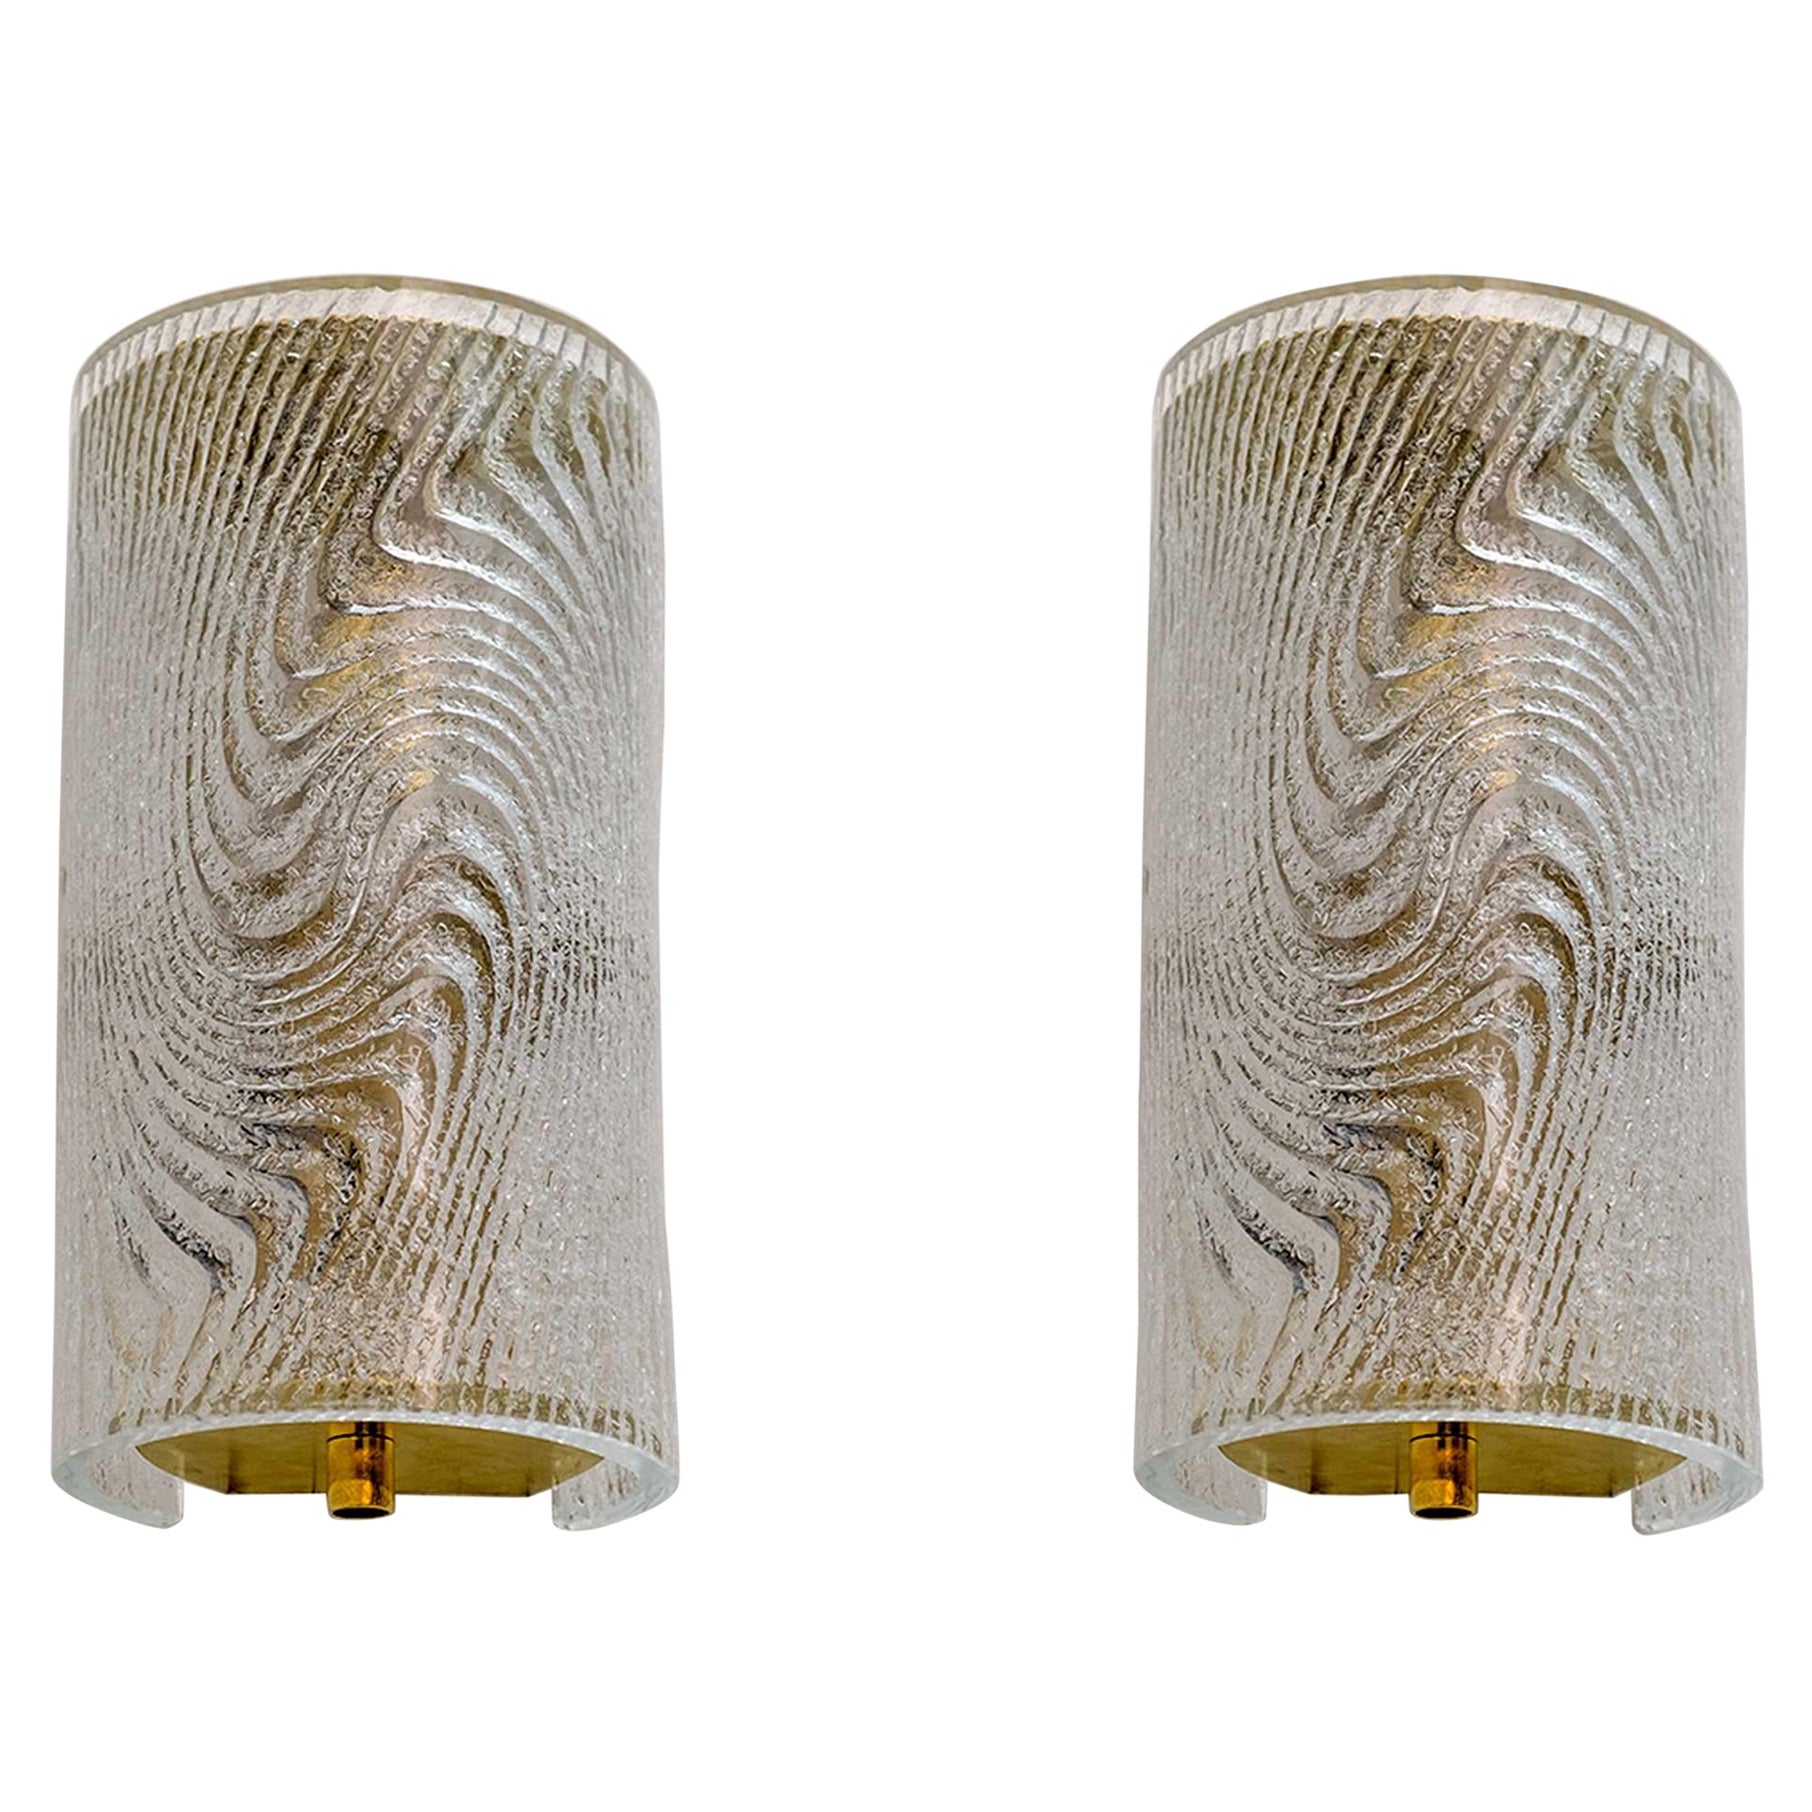 Pair of Modern Italian Murano Glass and Brass Wall Sconces "Corteccia", 80s